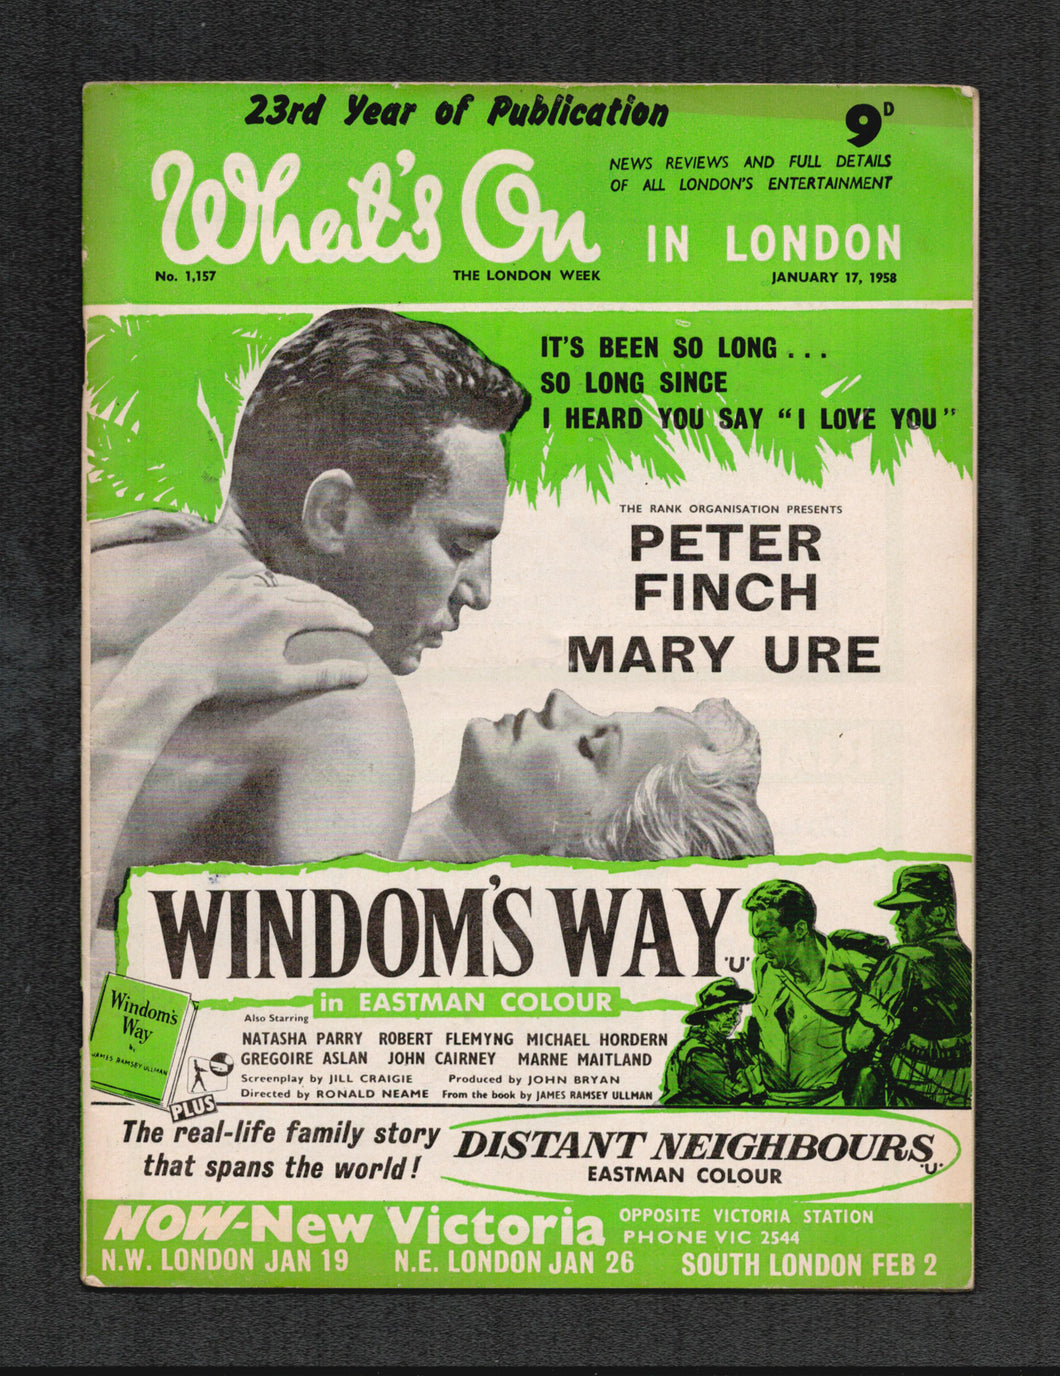 Whats On No 1157 Jan 17 1958